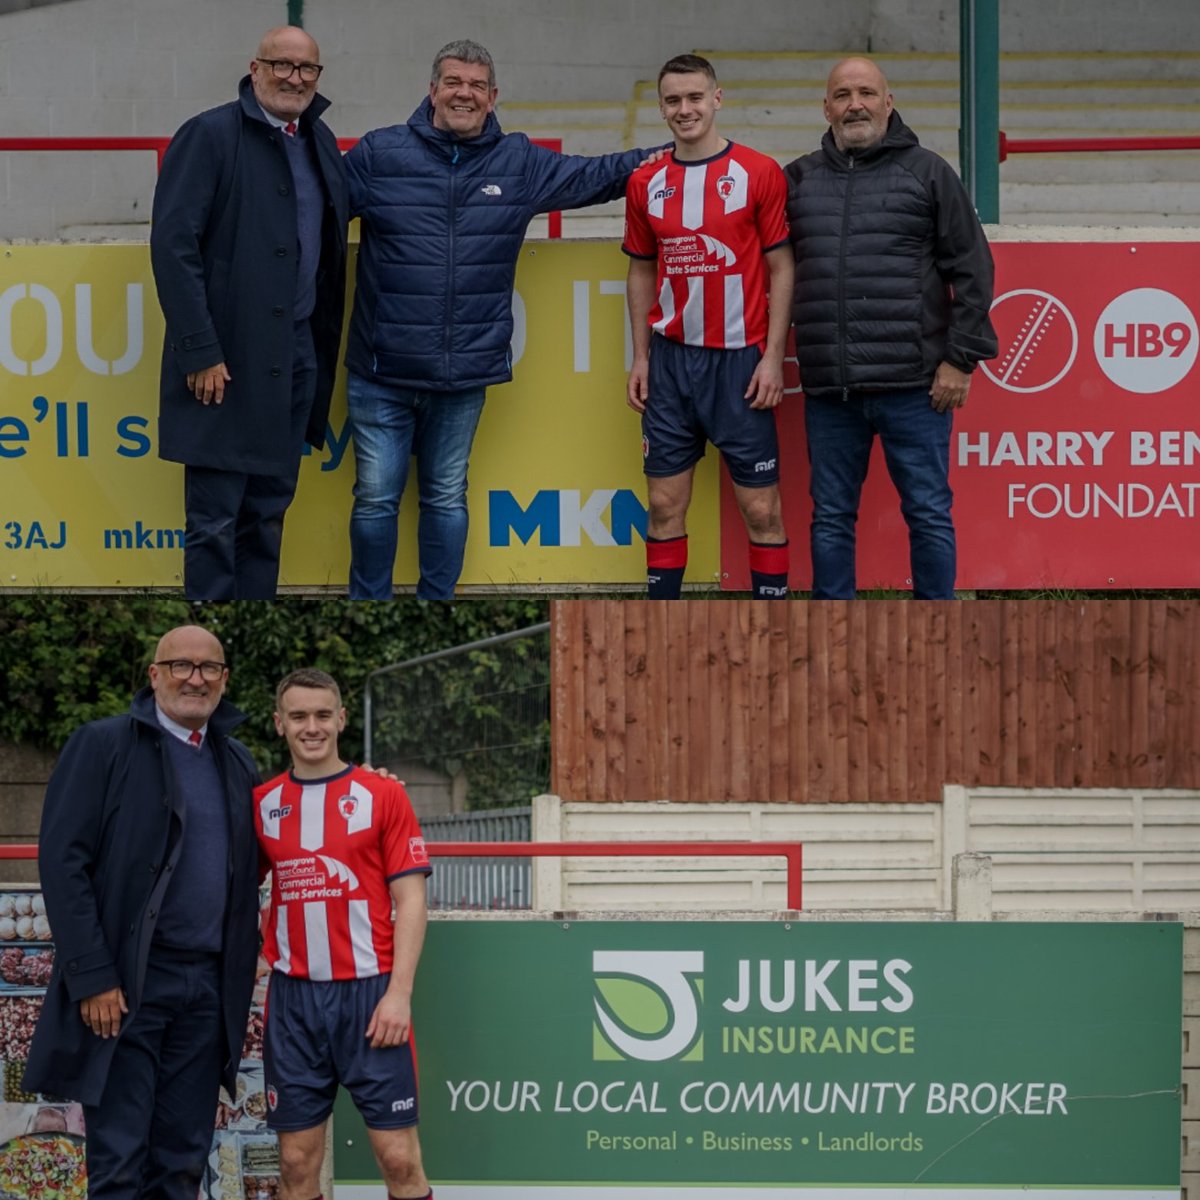 MONTHLY AWARDS: Shaw Celebrates Double Success At this weekend’s season finale against Barwell, midfielder Billy Shaw celebrated winning both the Player of the Month and Goal of the Month awards for April. Superb Billy 👏 ➡️ bromsgrovesporting.co.uk/monthly-awards…